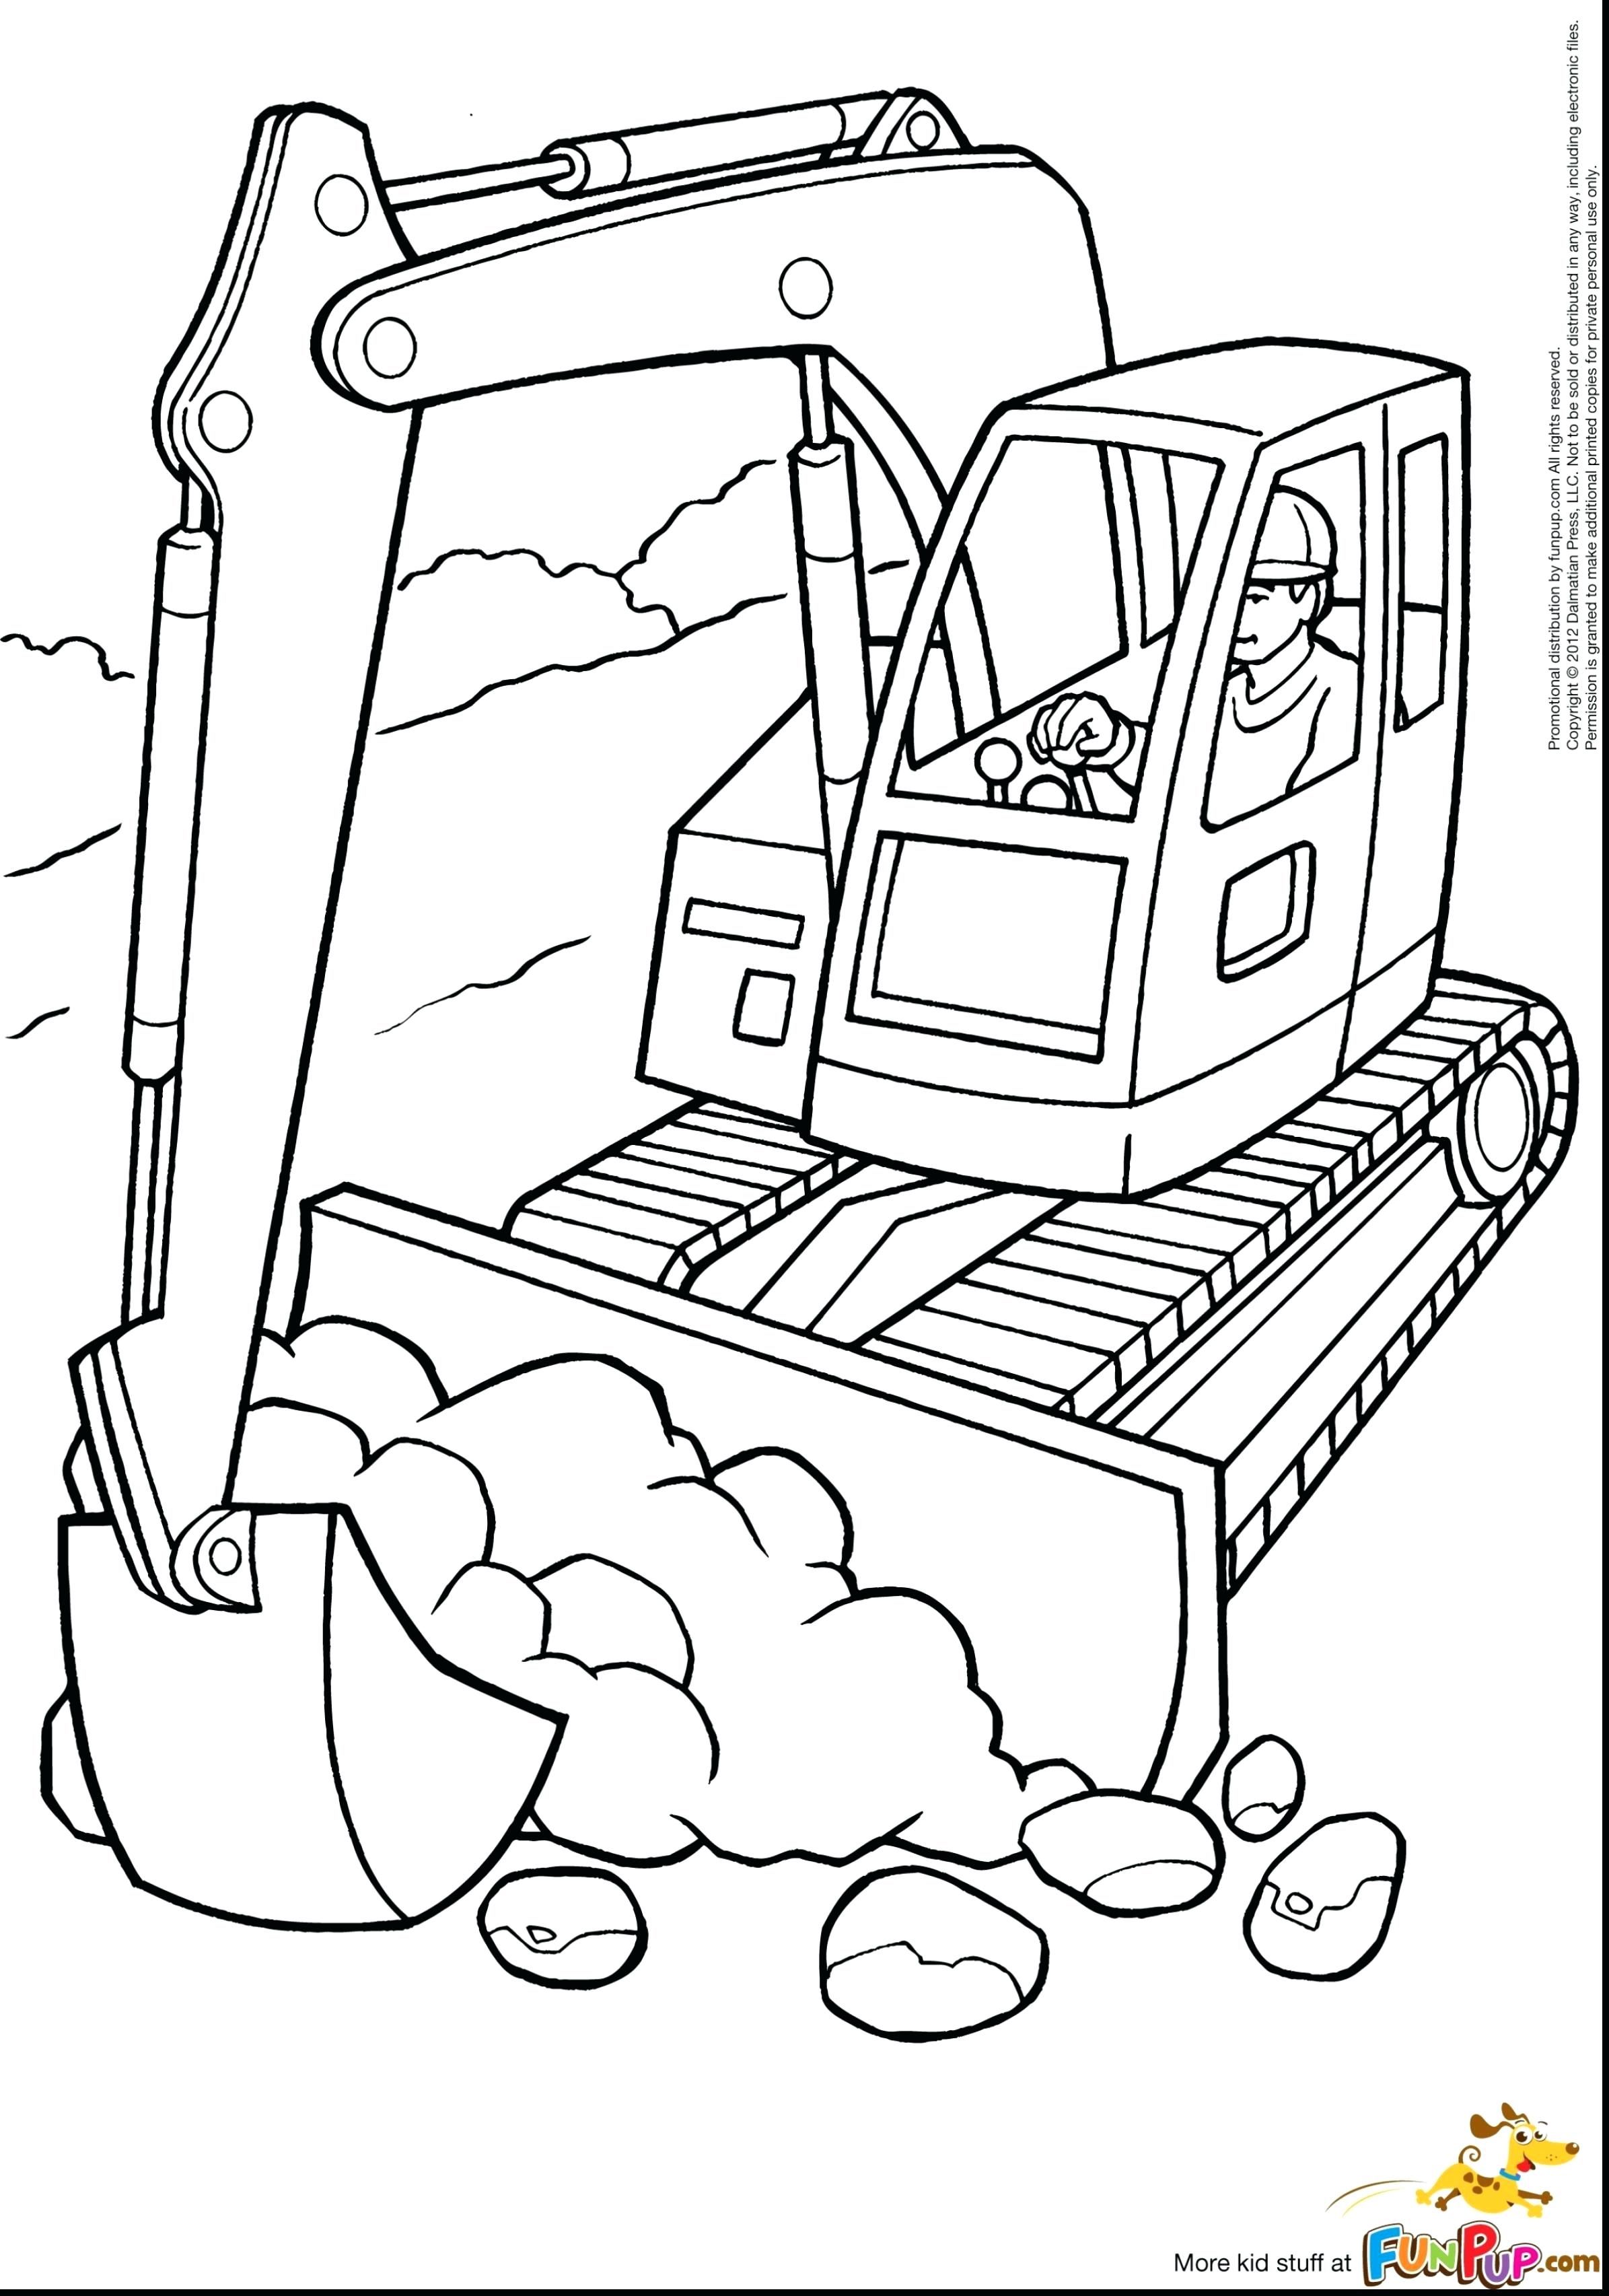 construction-equipment-drawing-at-getdrawings-free-download